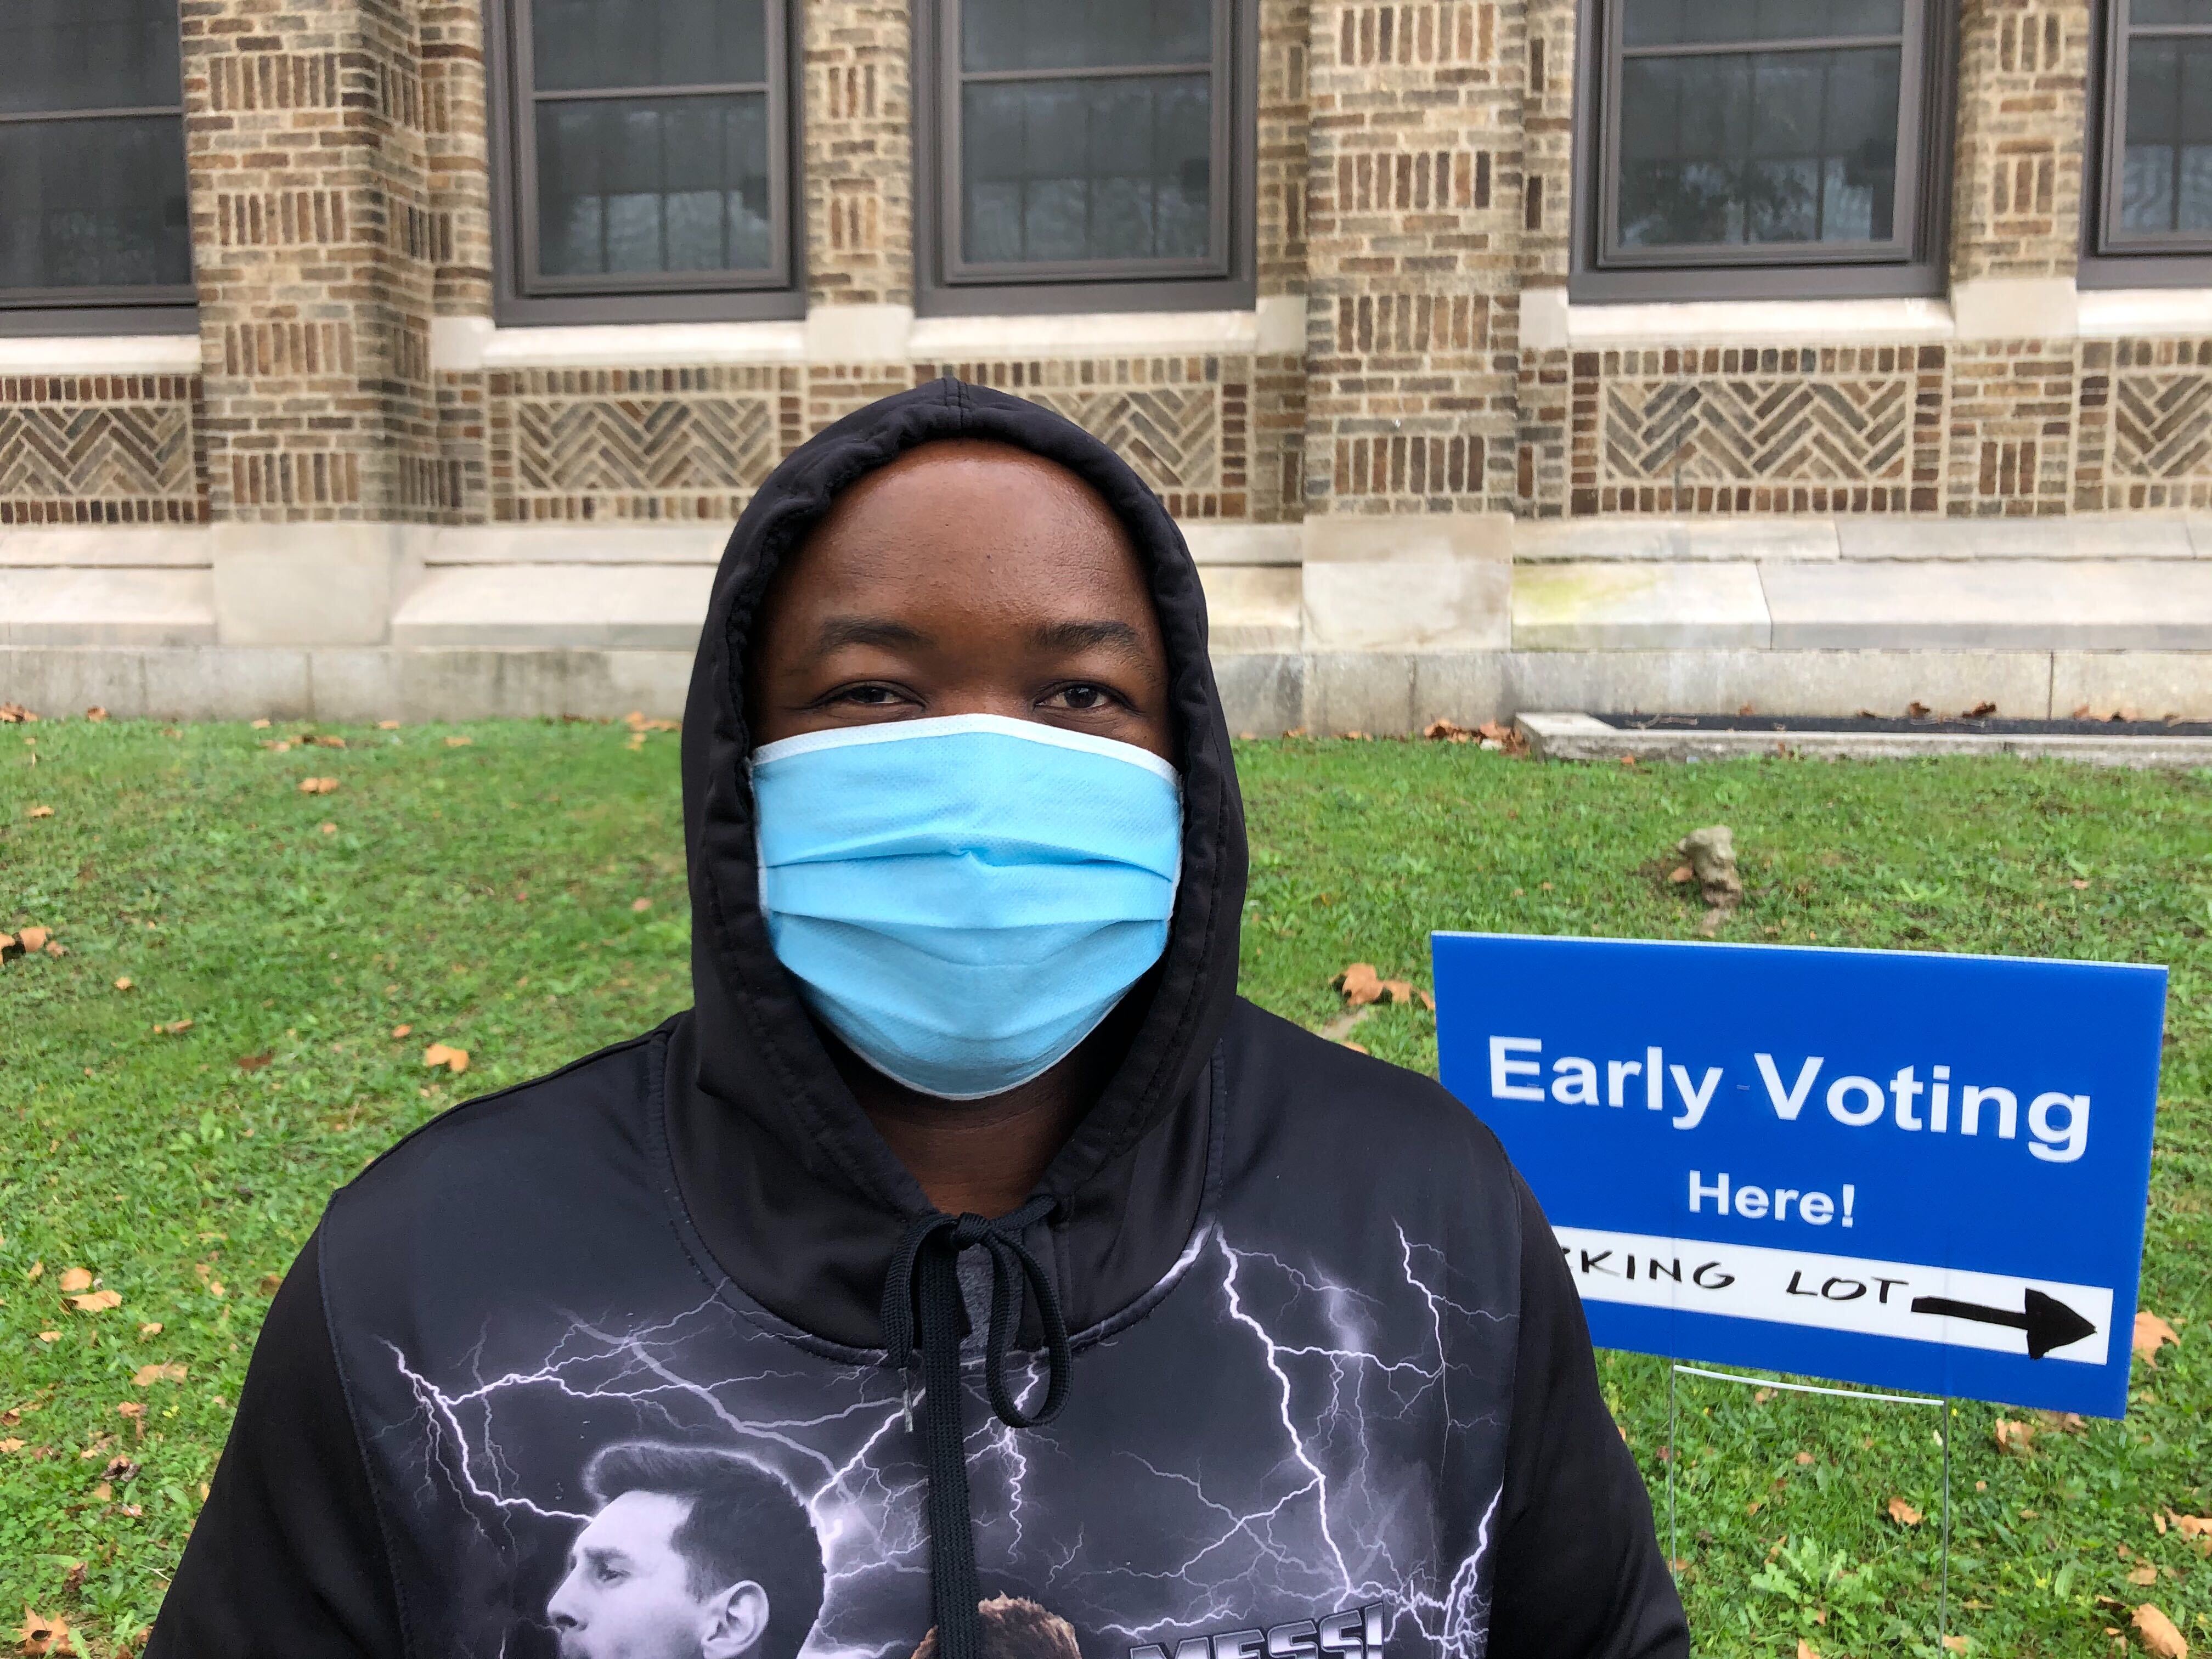 Man in a black hoodie, wearing a face mask, waits to vote.